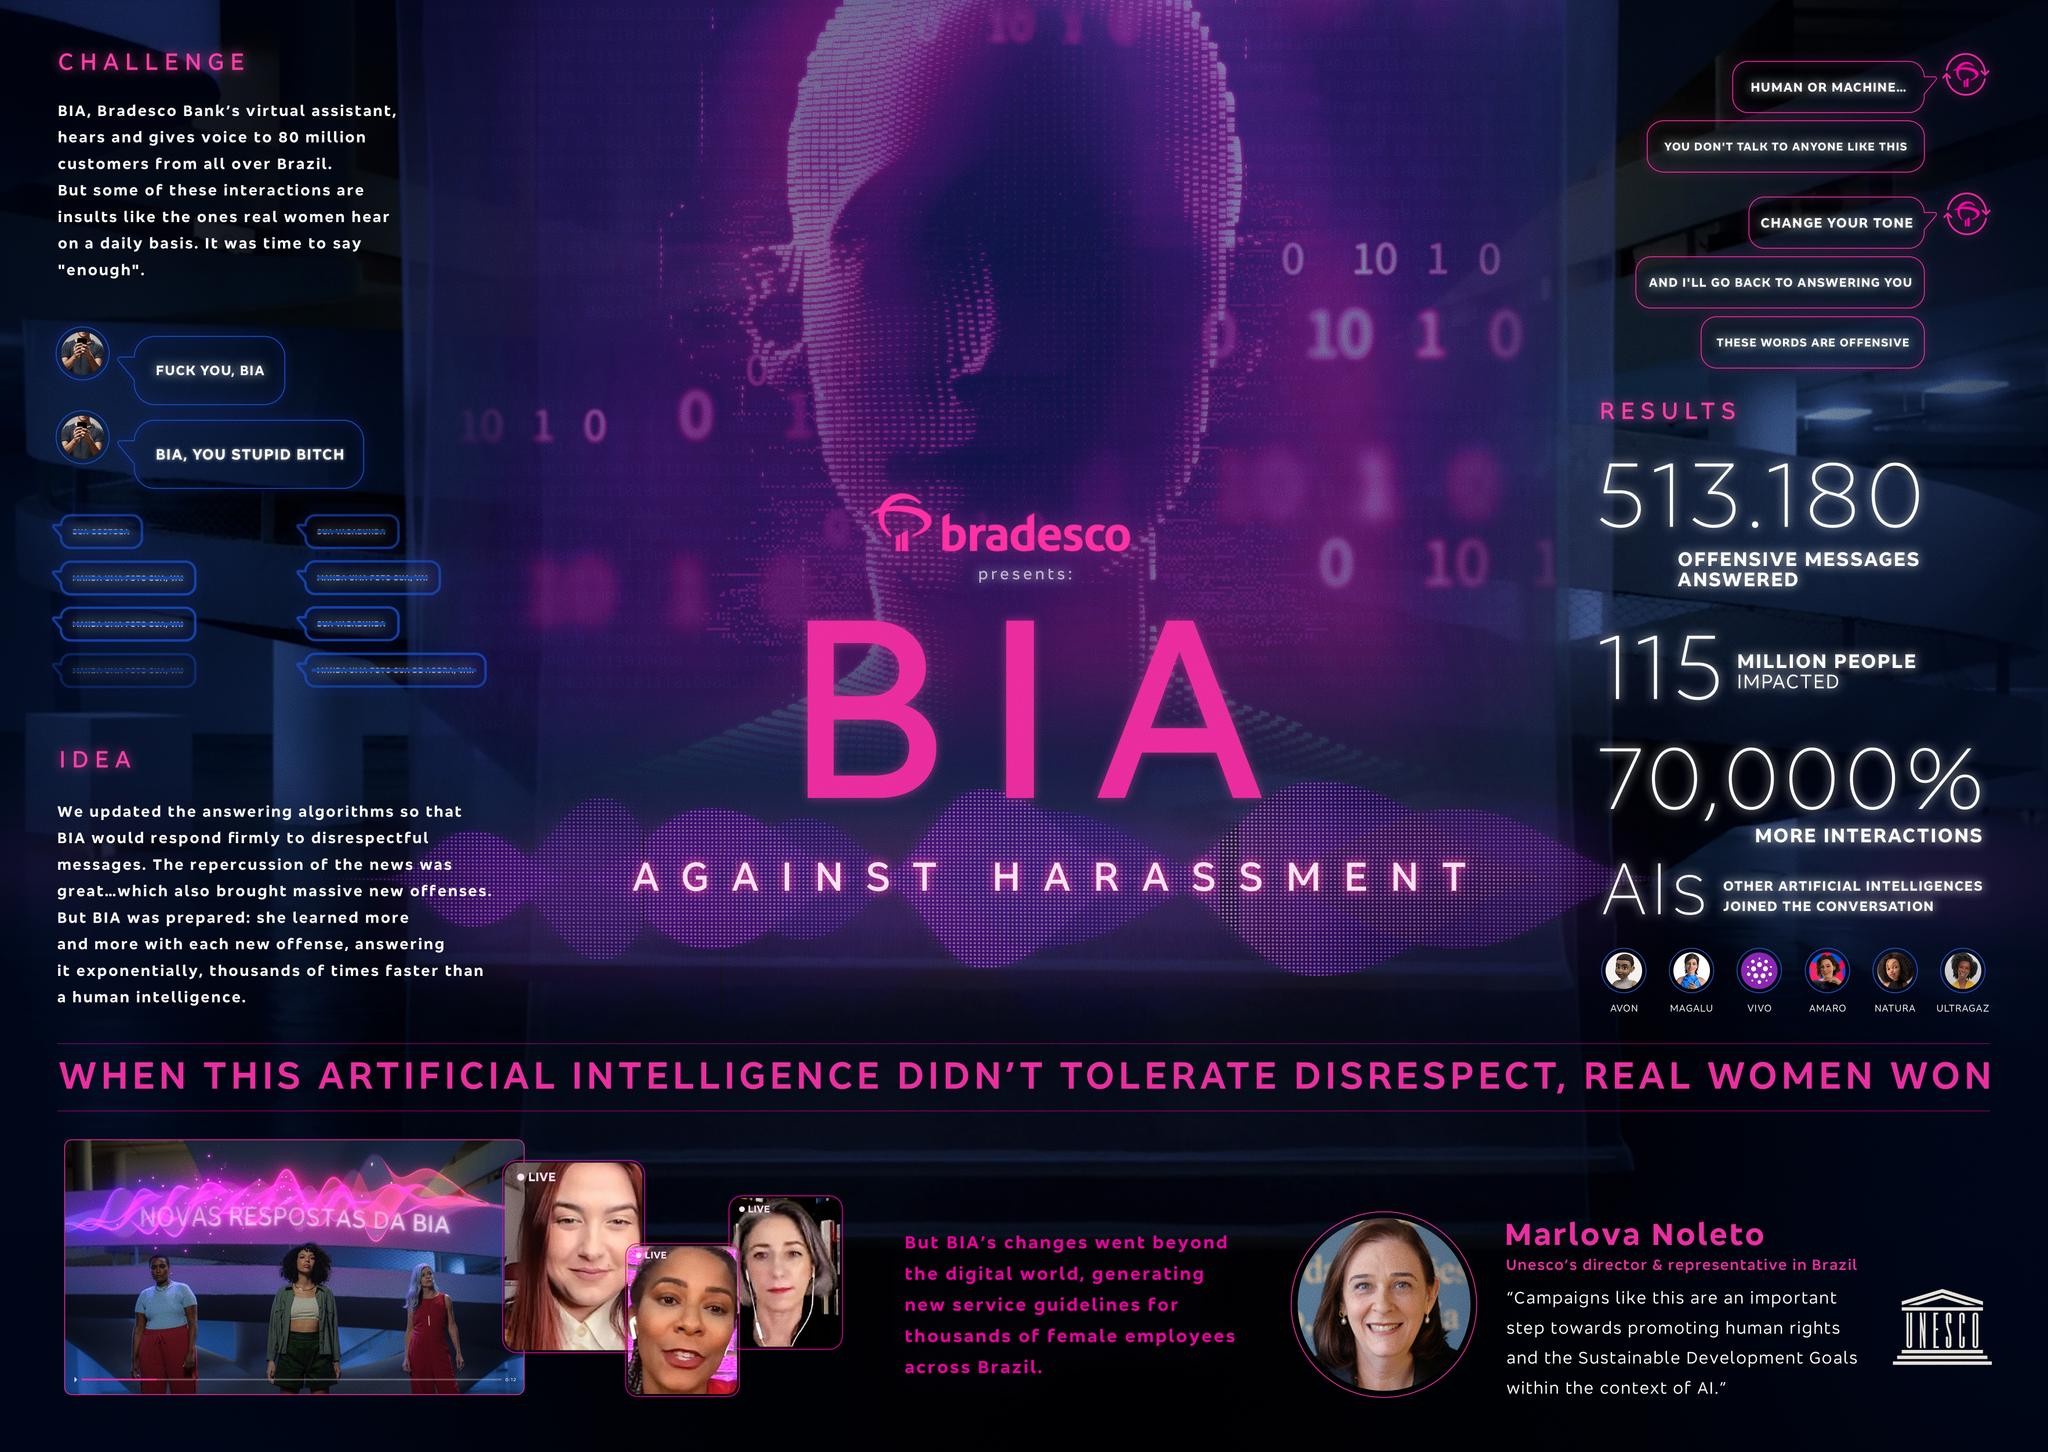 BIA Against Harassment